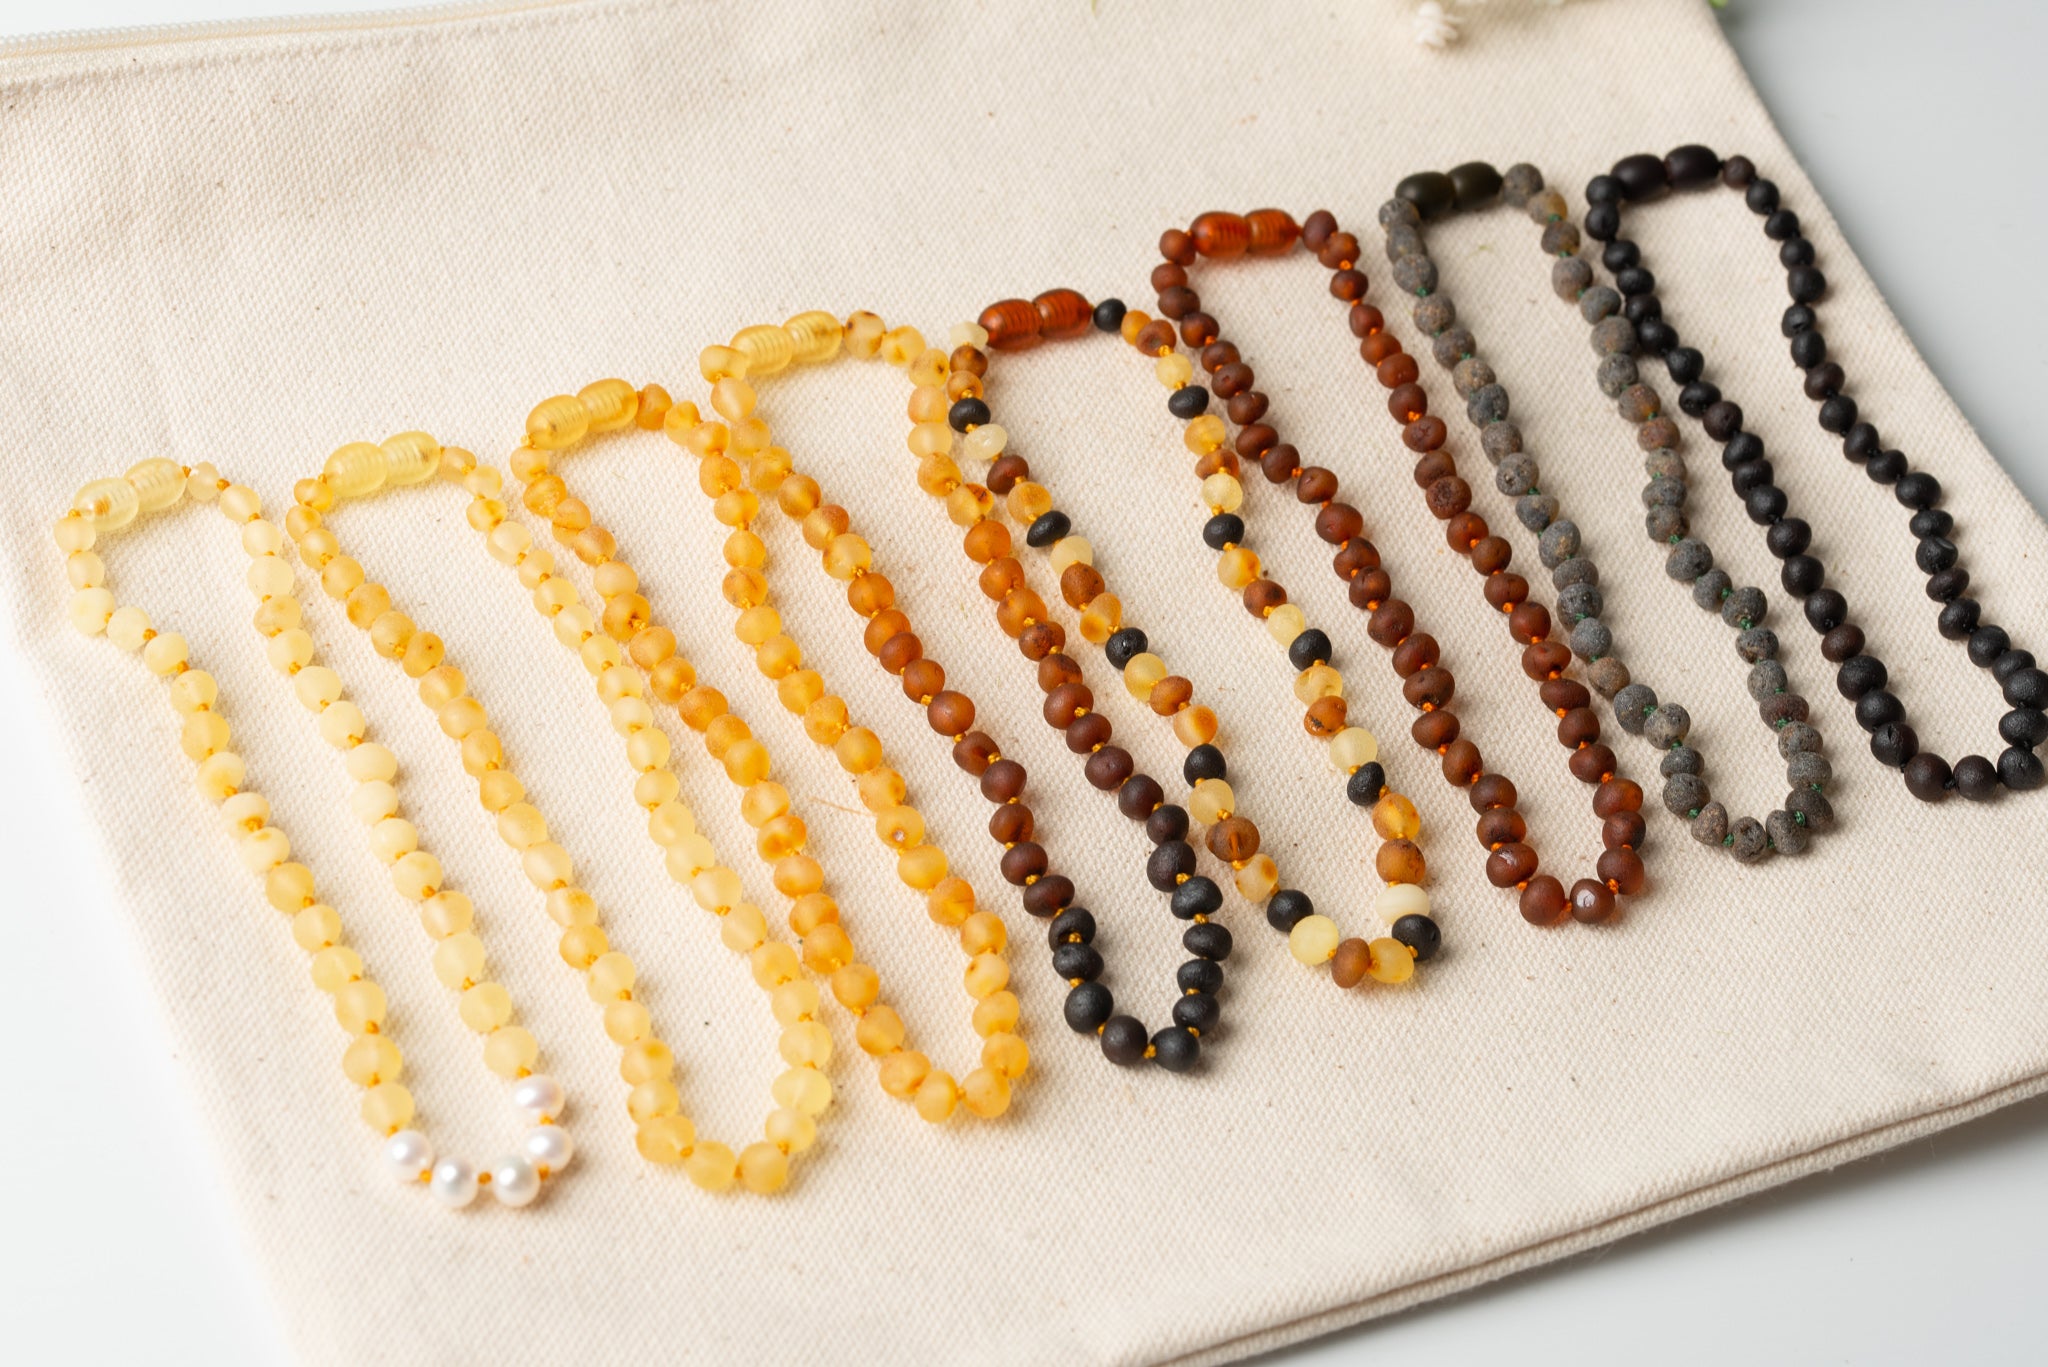 Baltic Essentials - 11 inch Baltic Amber Necklace Rainbow Honey Amber Pink  Rose Quartz Red Agate Amethyst Aventurine Jade newborn Baby, Infant,  Toddler for just $28.00. Order here https://goo.gl/AWD7jb #teething  #toddler #baby #